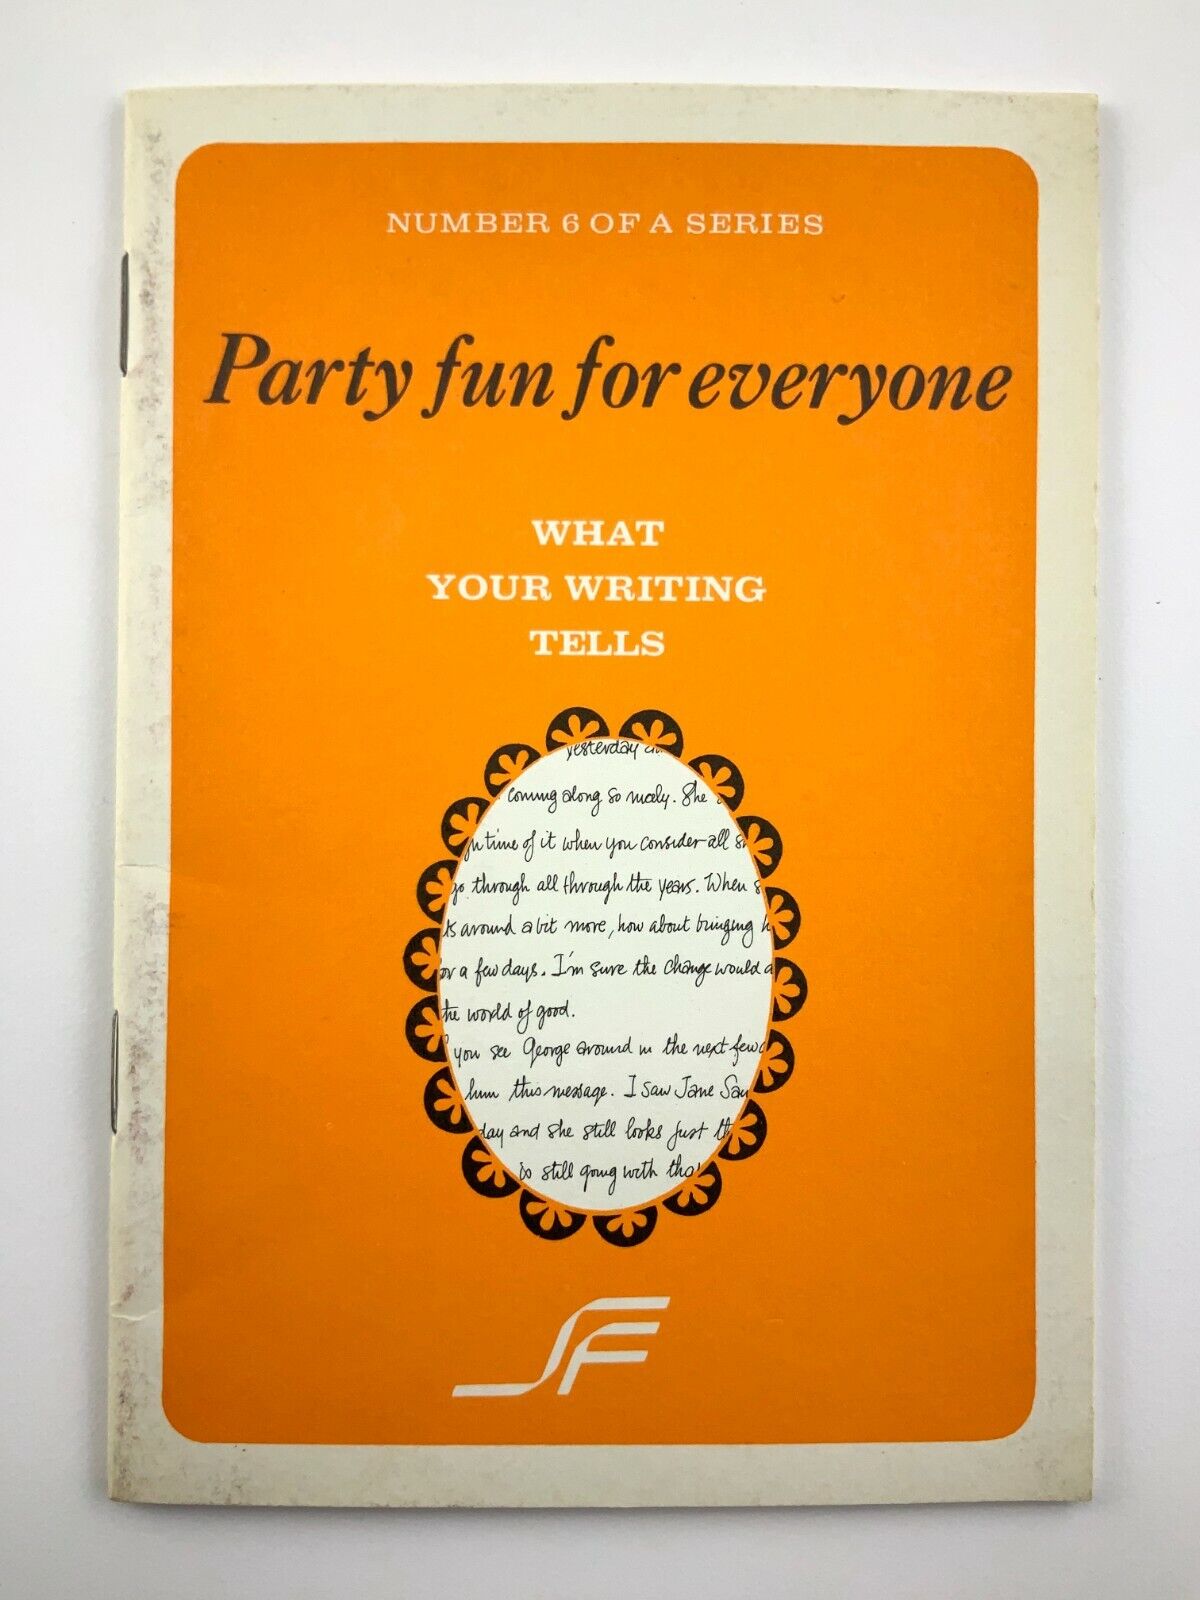 1964 Salada Foods Ltd Number 6 In Series What Your Writing Tells Booklet 494C